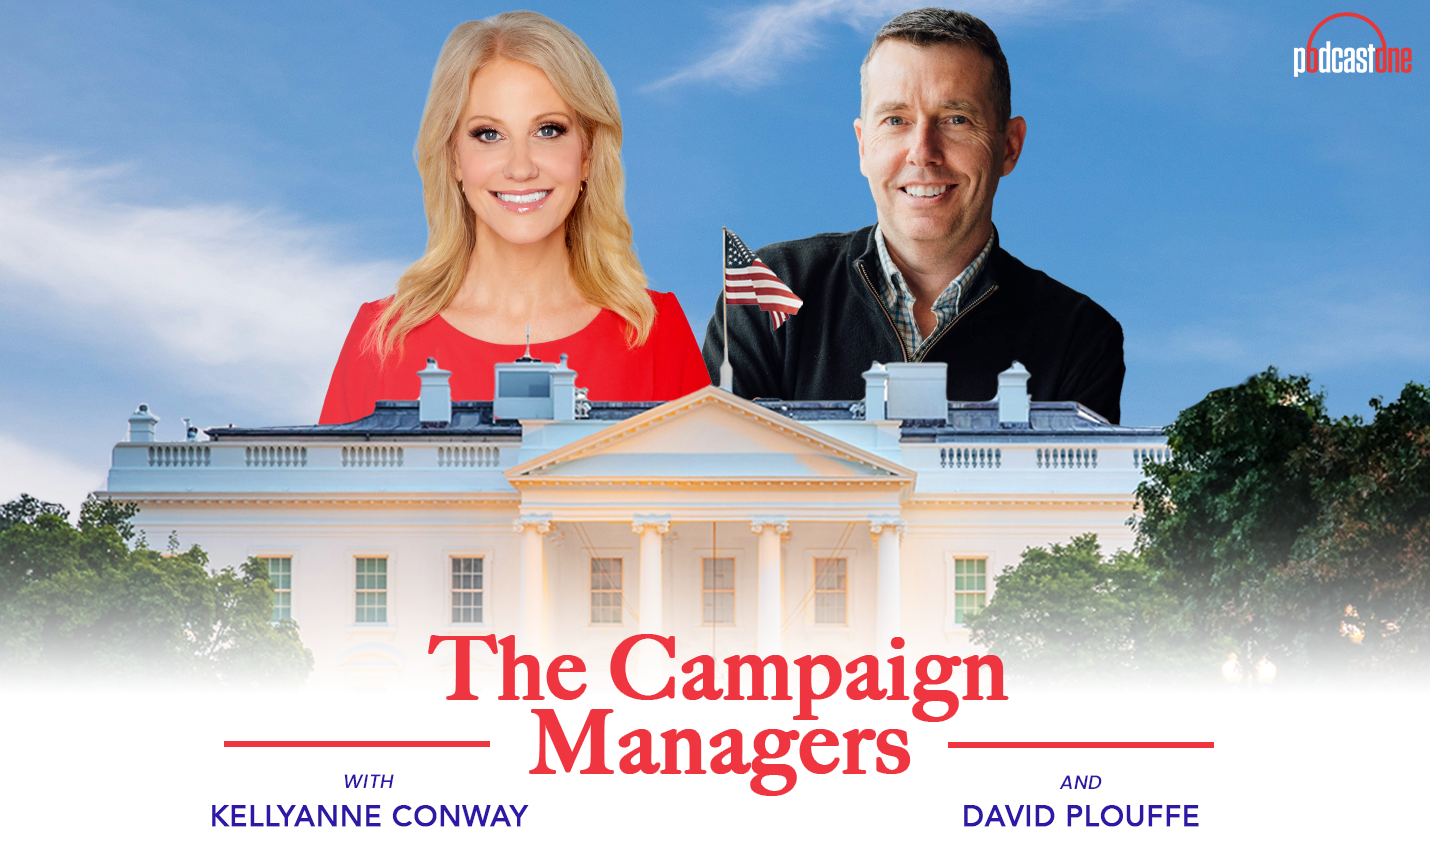 The Campaign Managers